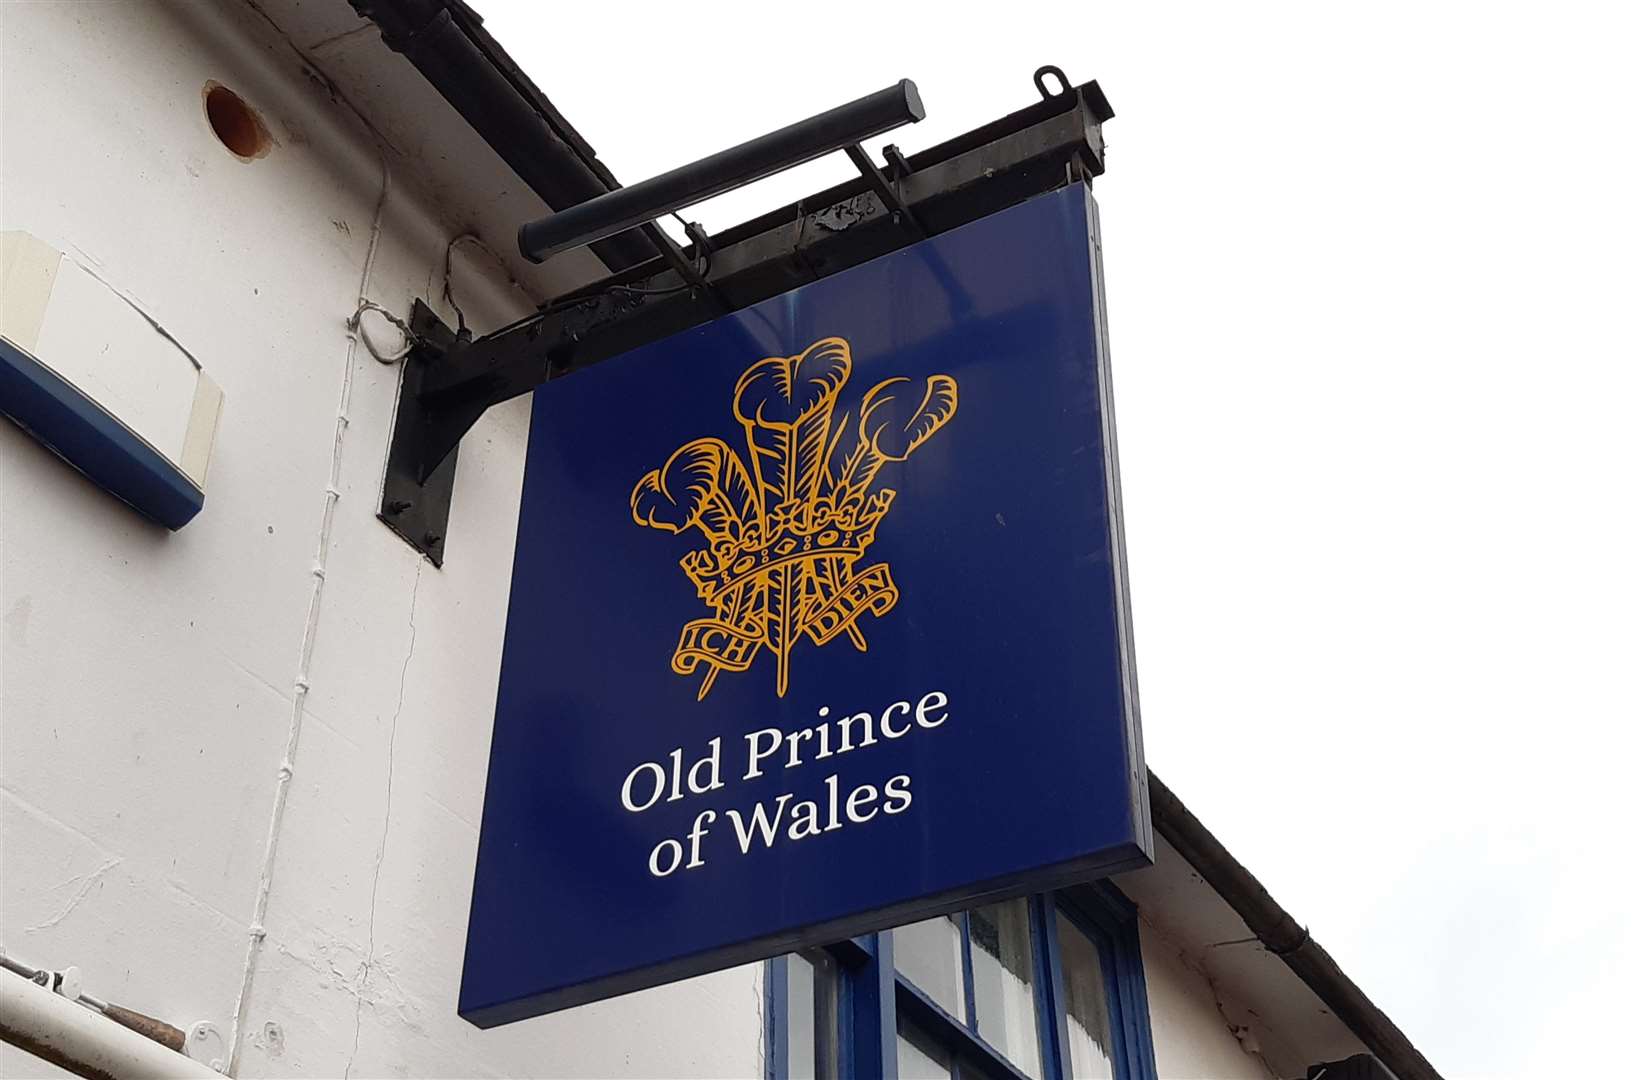 This Old Prince of Wales sign is set to remain in place